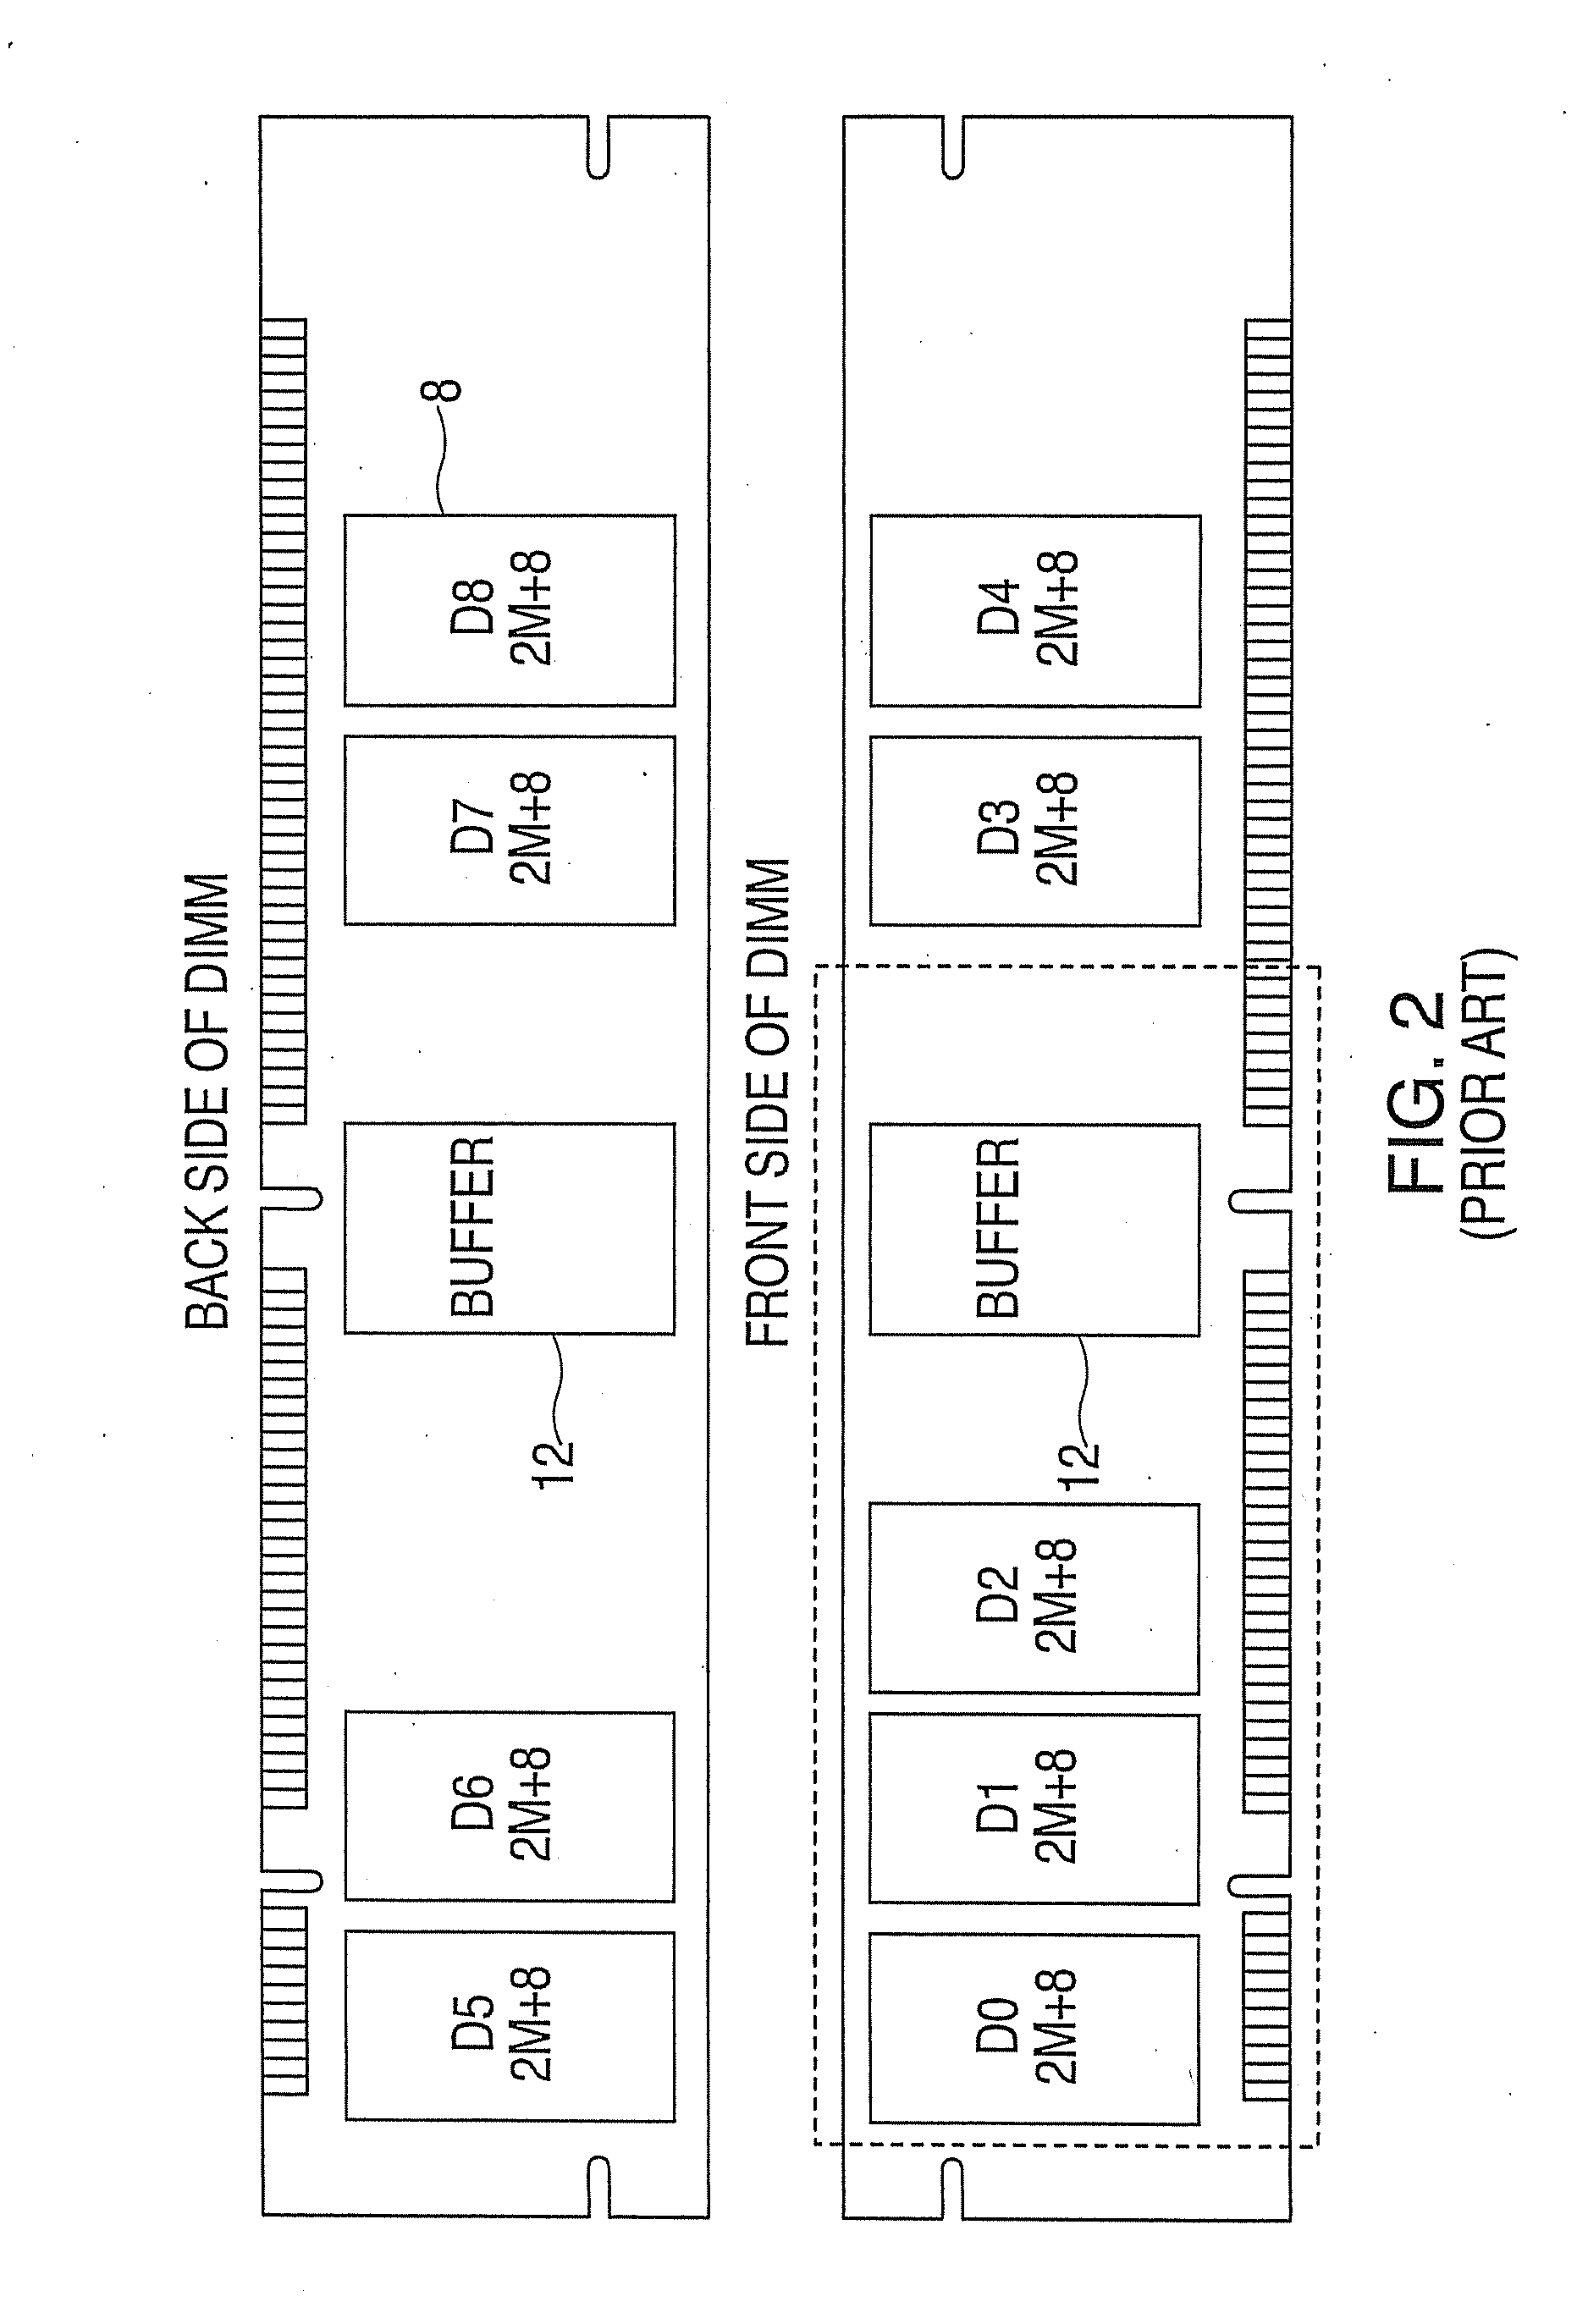 System, method and storage medium for providing a high speed test interface to a memory subsystem